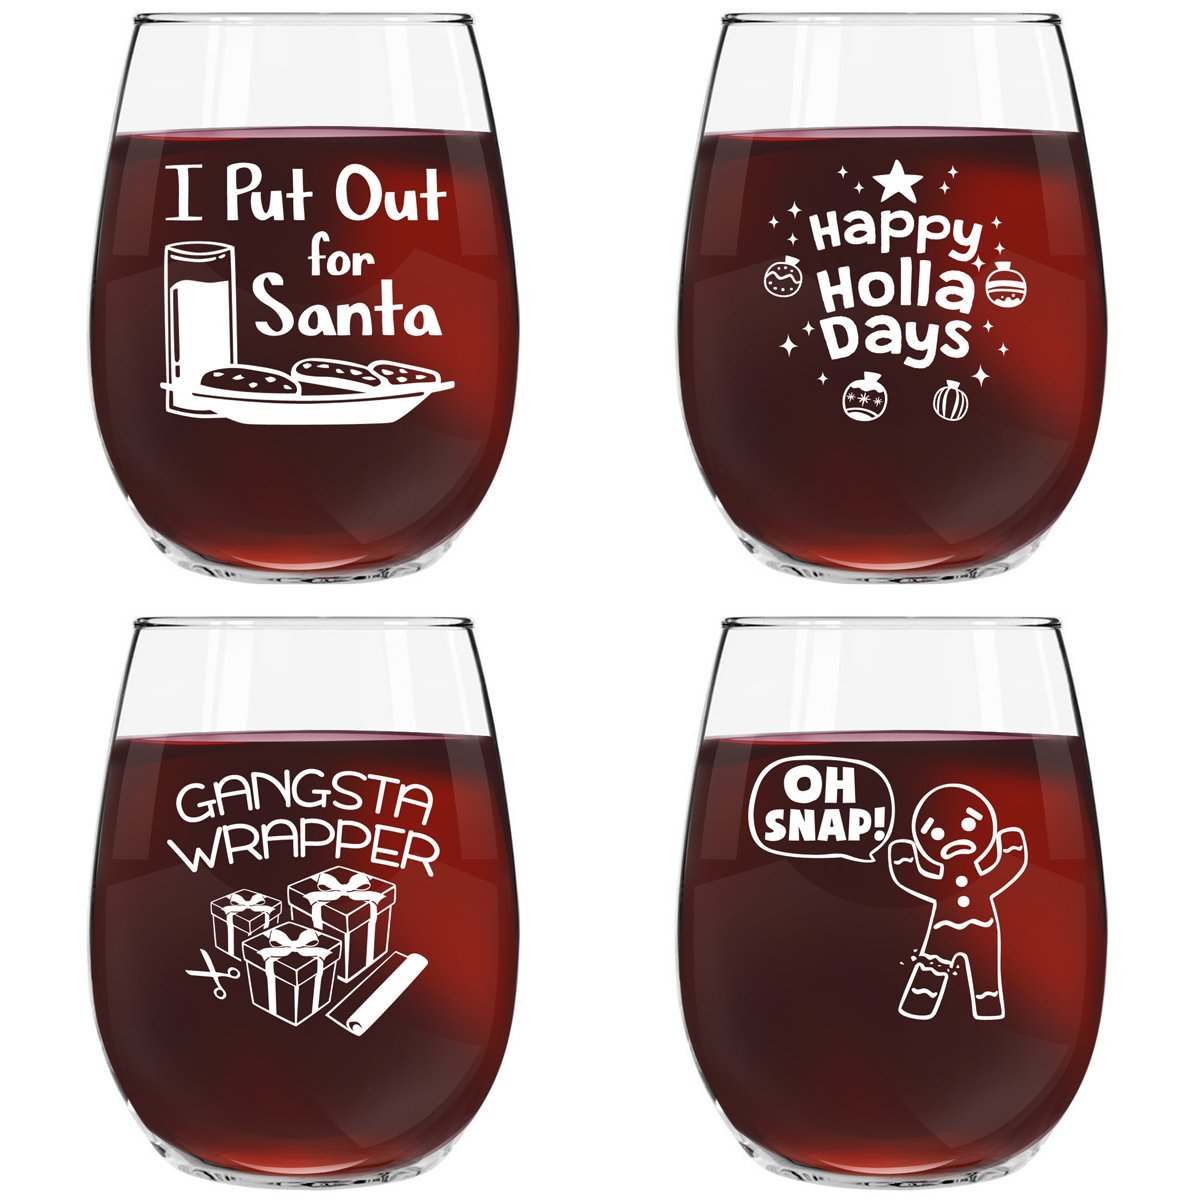 wine glasses that make a great gift this holiday season. They are funny and dishwasher safe